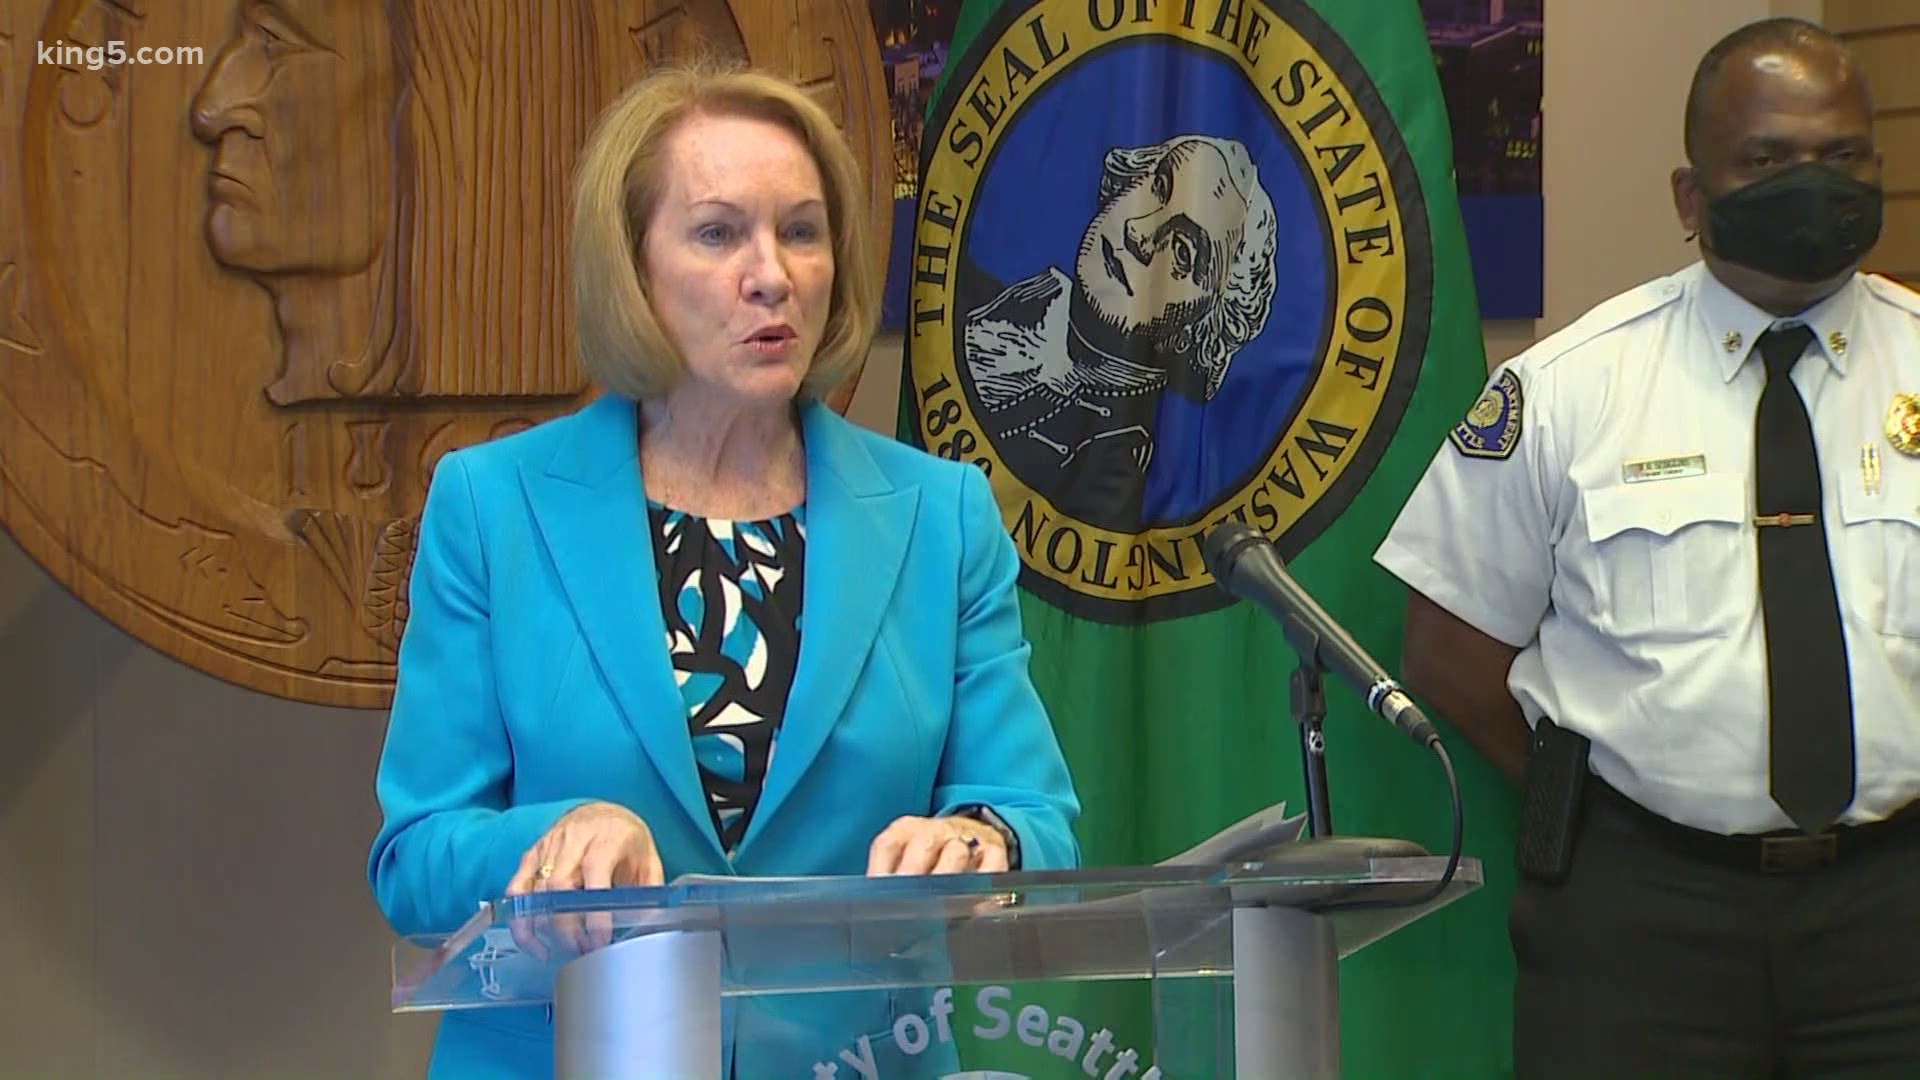 Seattle Mayor Jenny Durkan is blasting the city council's plan to cut the police department’s budget by 50% and instead proposed transferring some police functions.